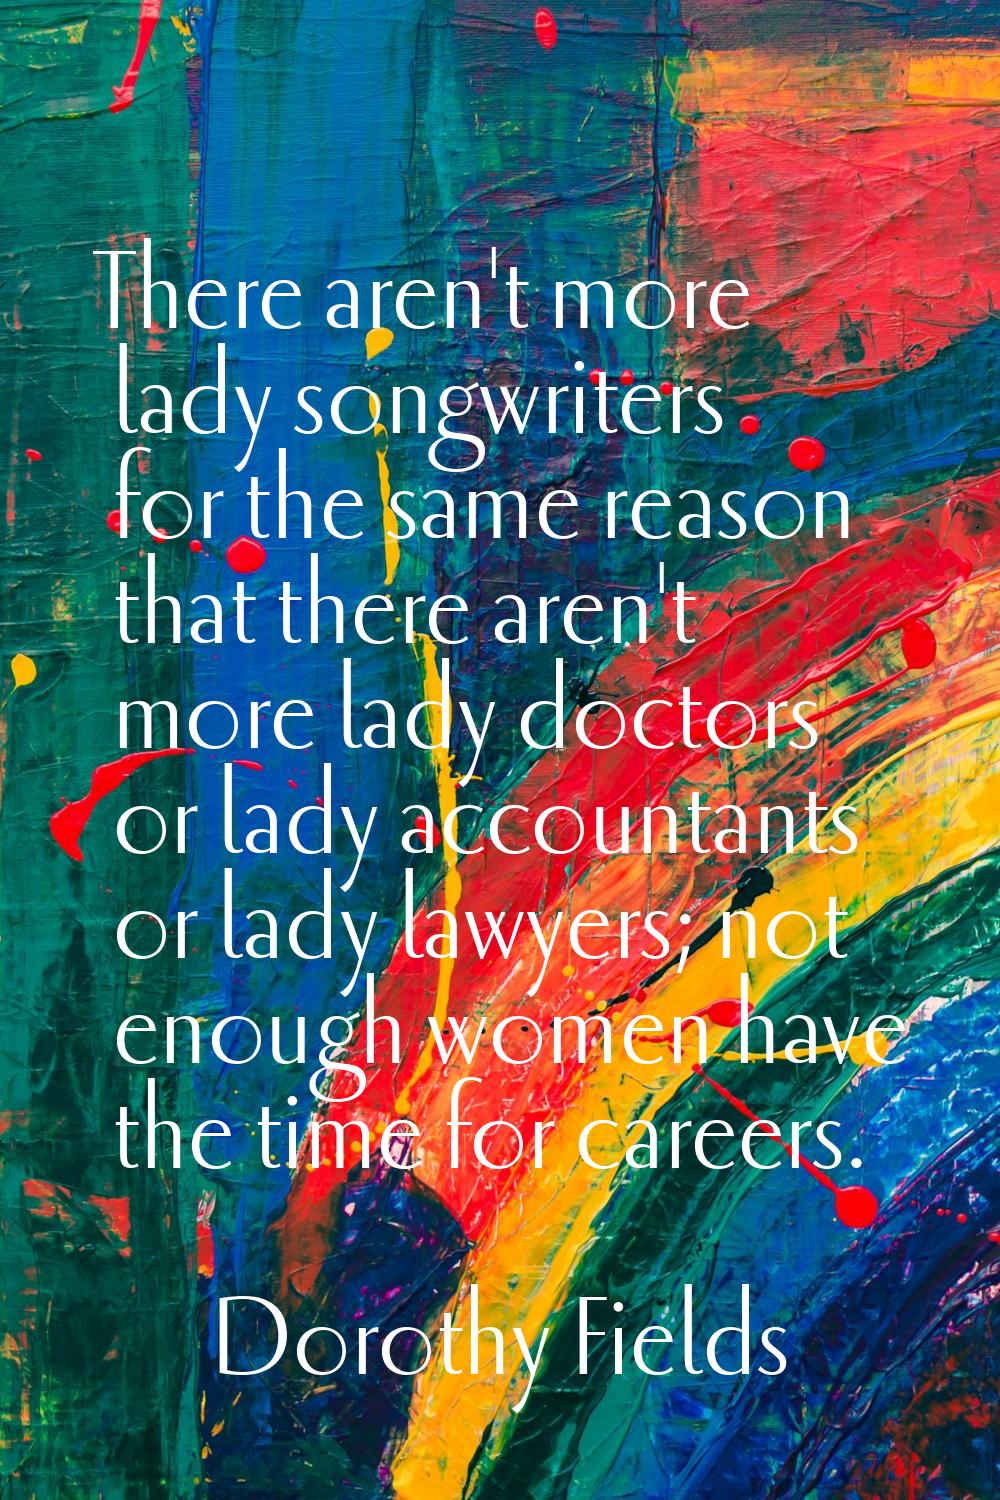 There aren't more lady songwriters for the same reason that there aren't more lady doctors or lady 